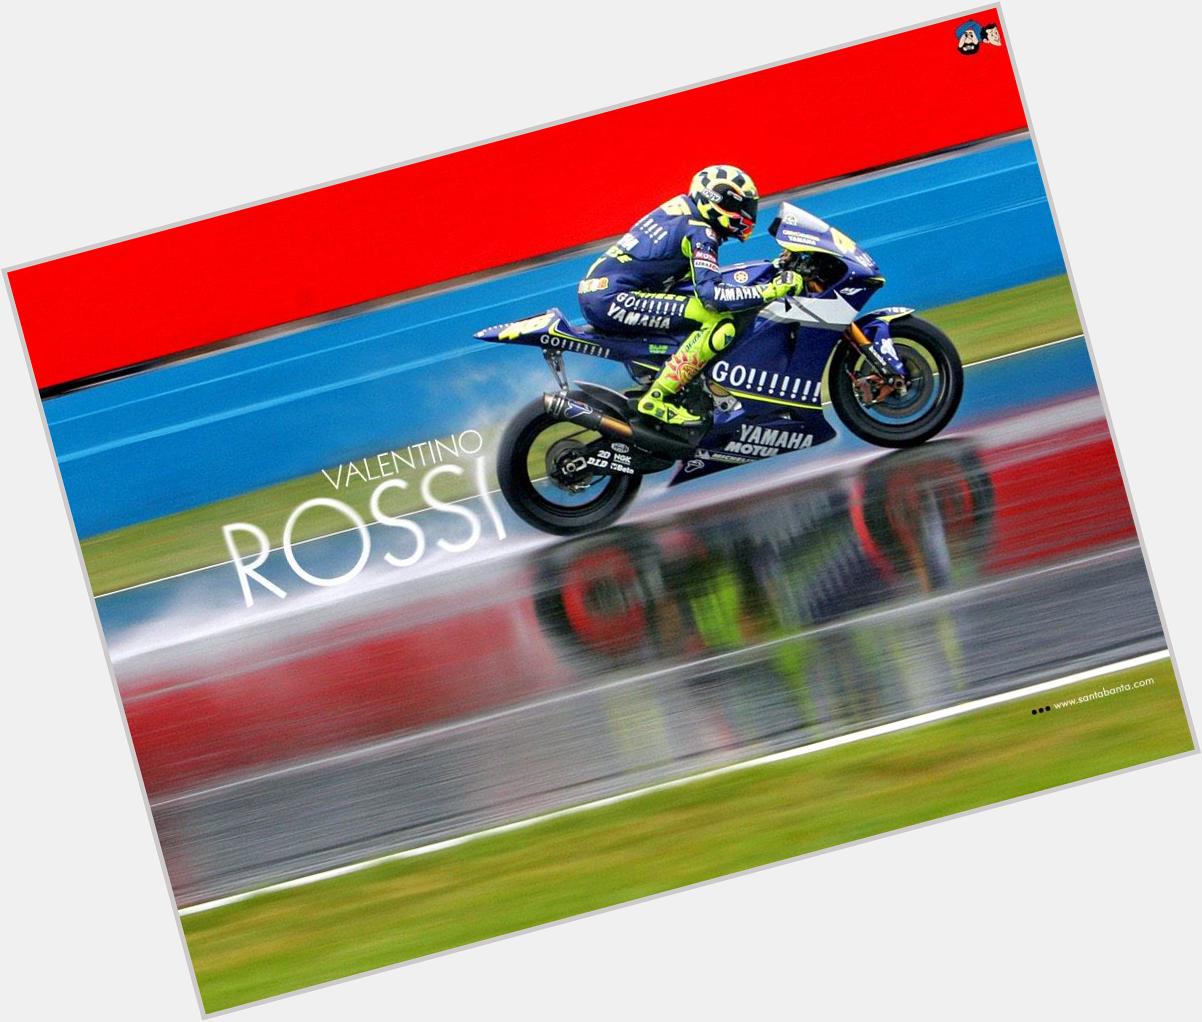 Happy birthday to the legend that is Valentino Rossi   